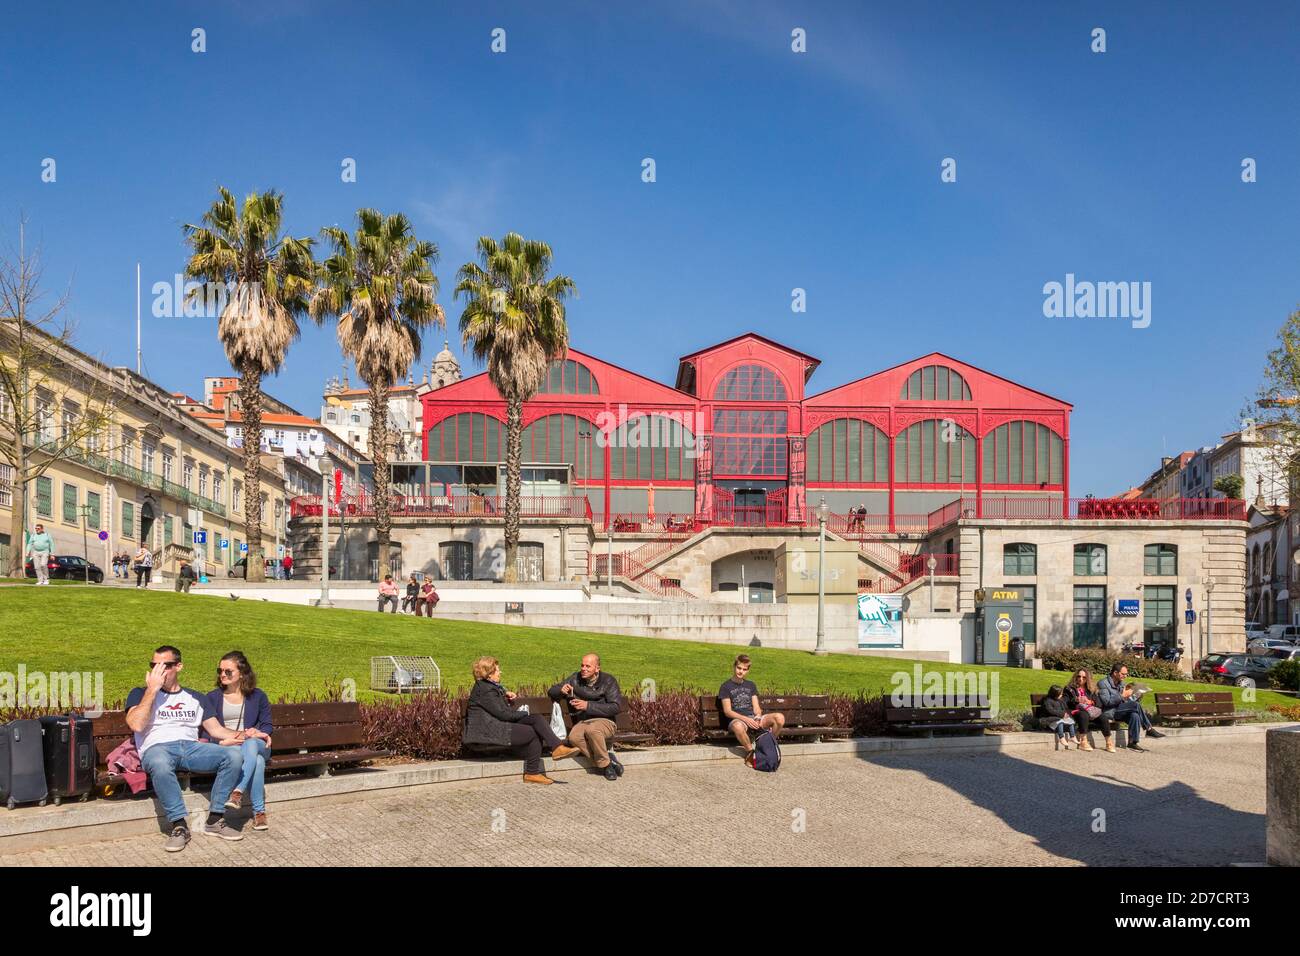 10 March 2020: Porto, Portugal - People sitting in the Praca Infante Dom Henrique or Prince Henry the Navigator Place in Porto. Stock Photo